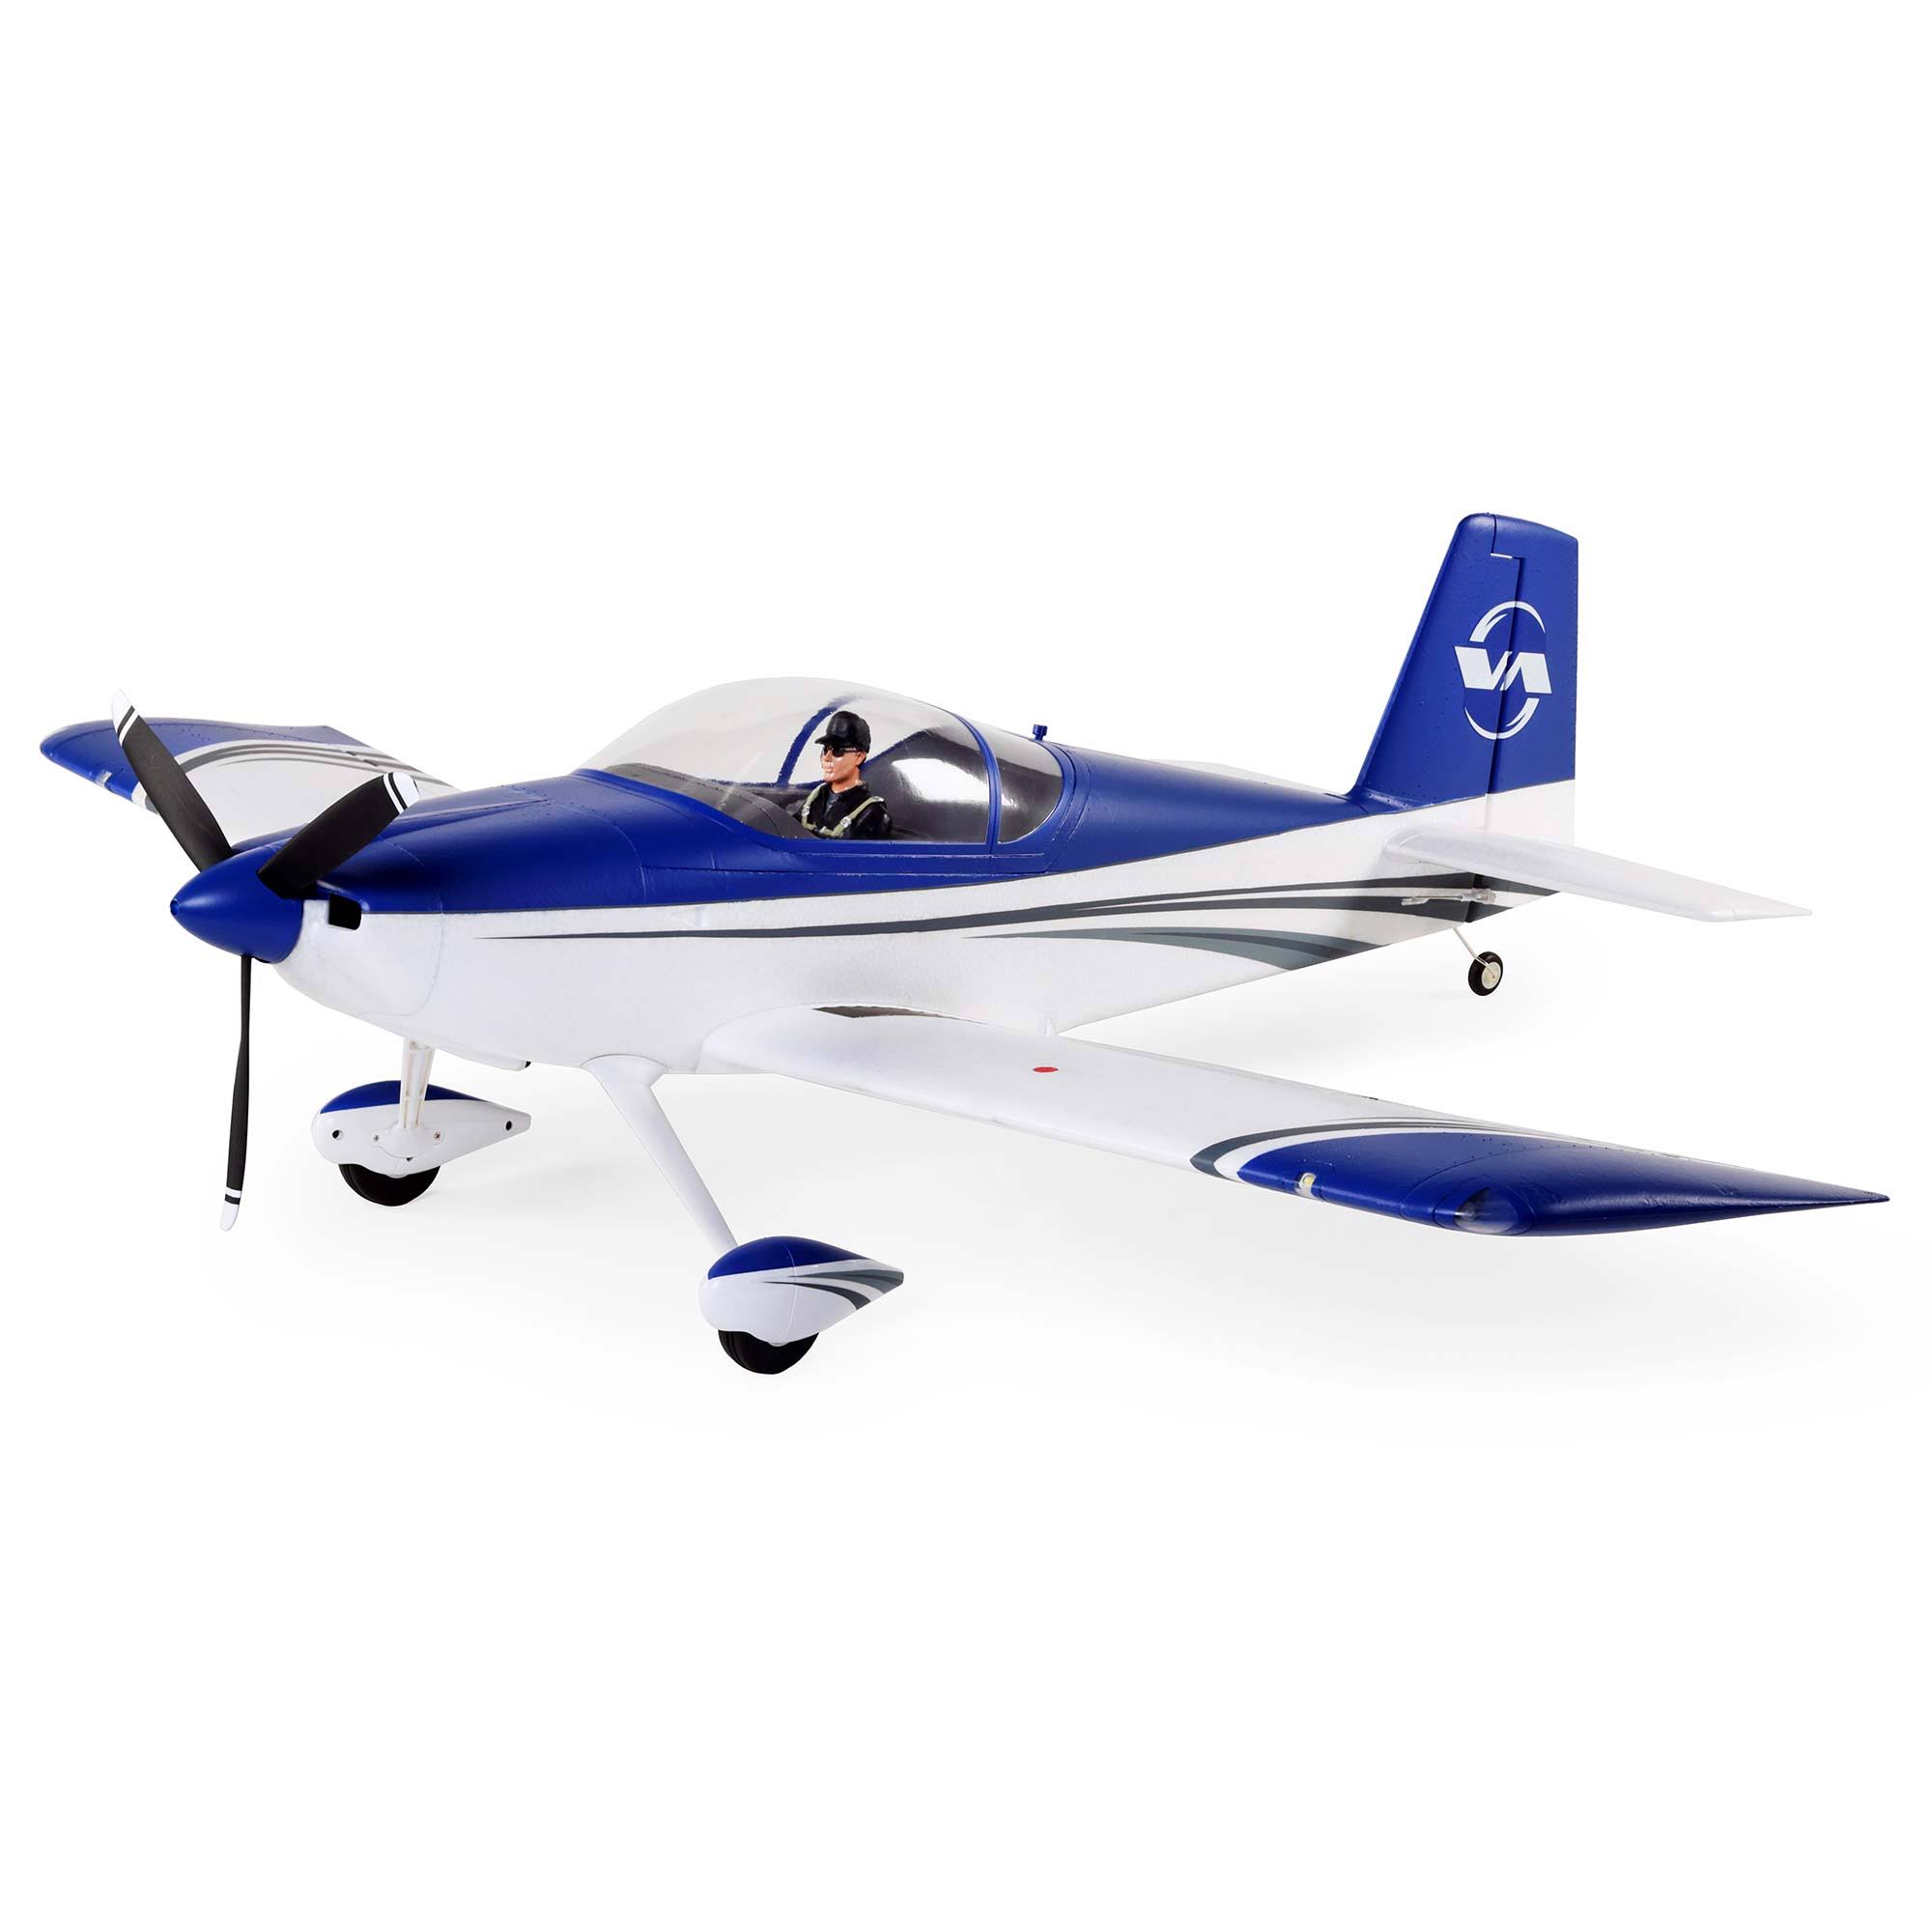 E-flite RC Airplane RV-7 1.1m BNF Basic (Transmitter, Battery and Charger Not Included) with Safe Select and AS3X, EFL01850